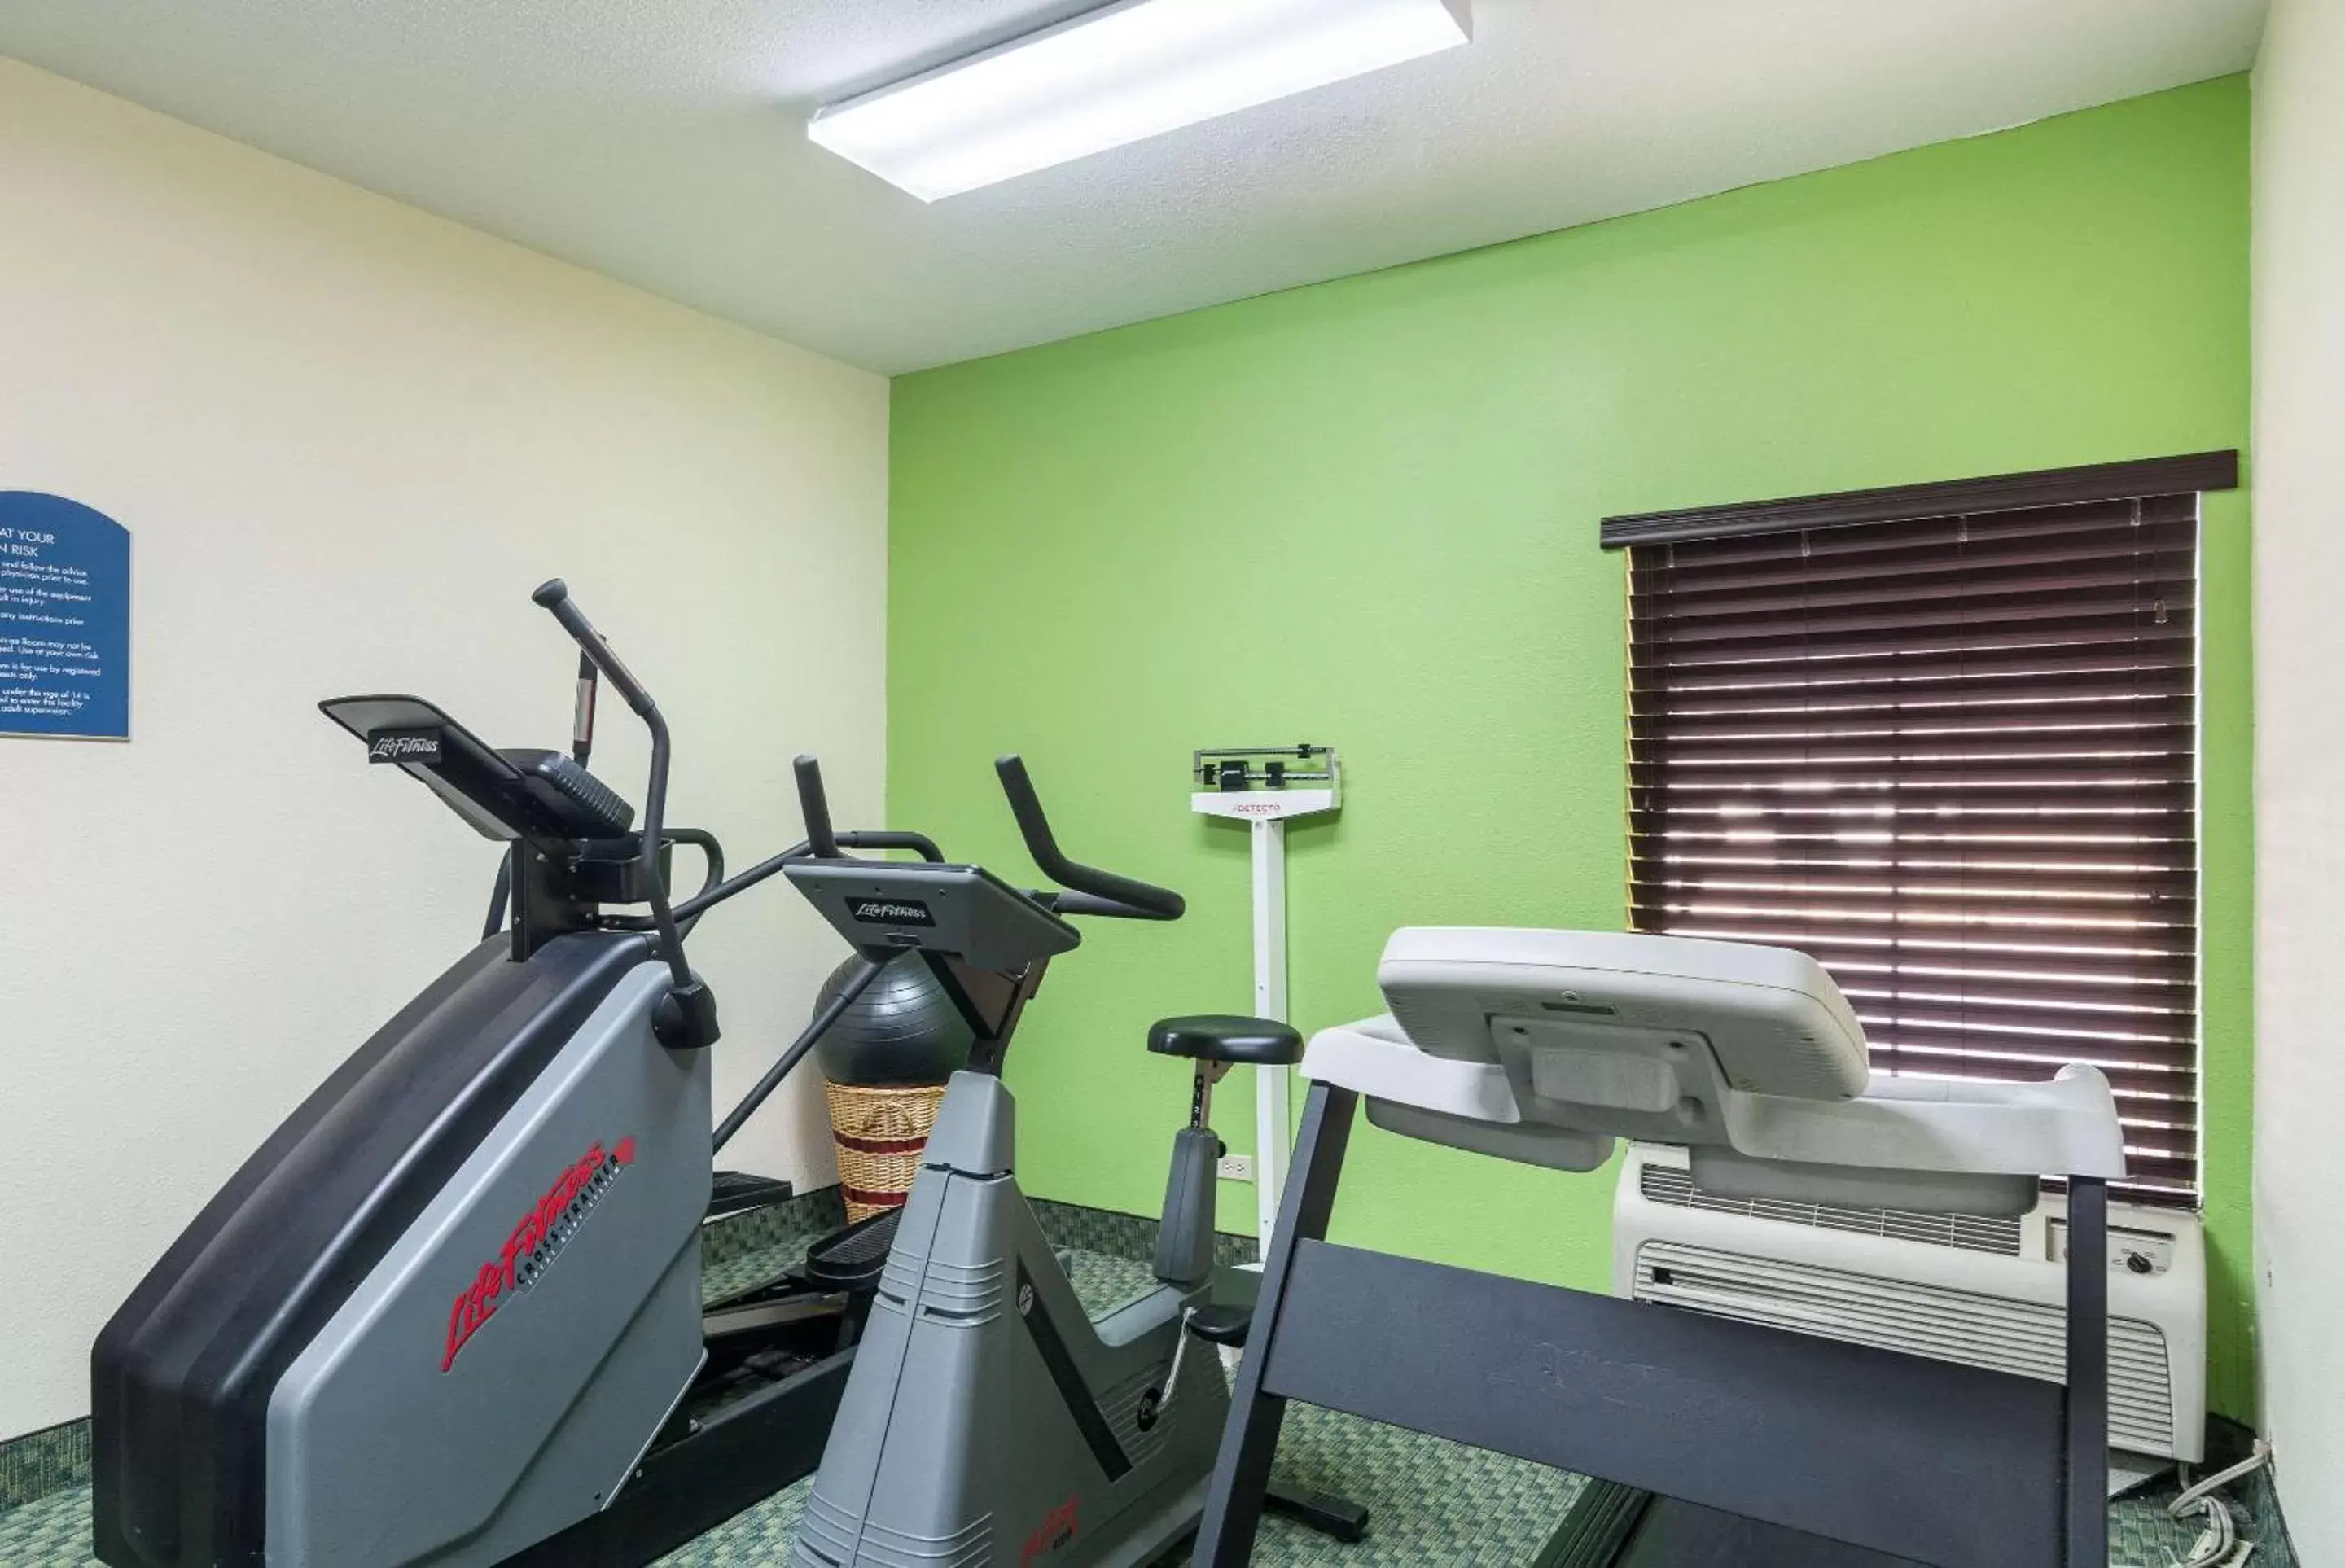 Fitness centre/facilities, Fitness Center/Facilities in Quality Inn and Suites Harvey